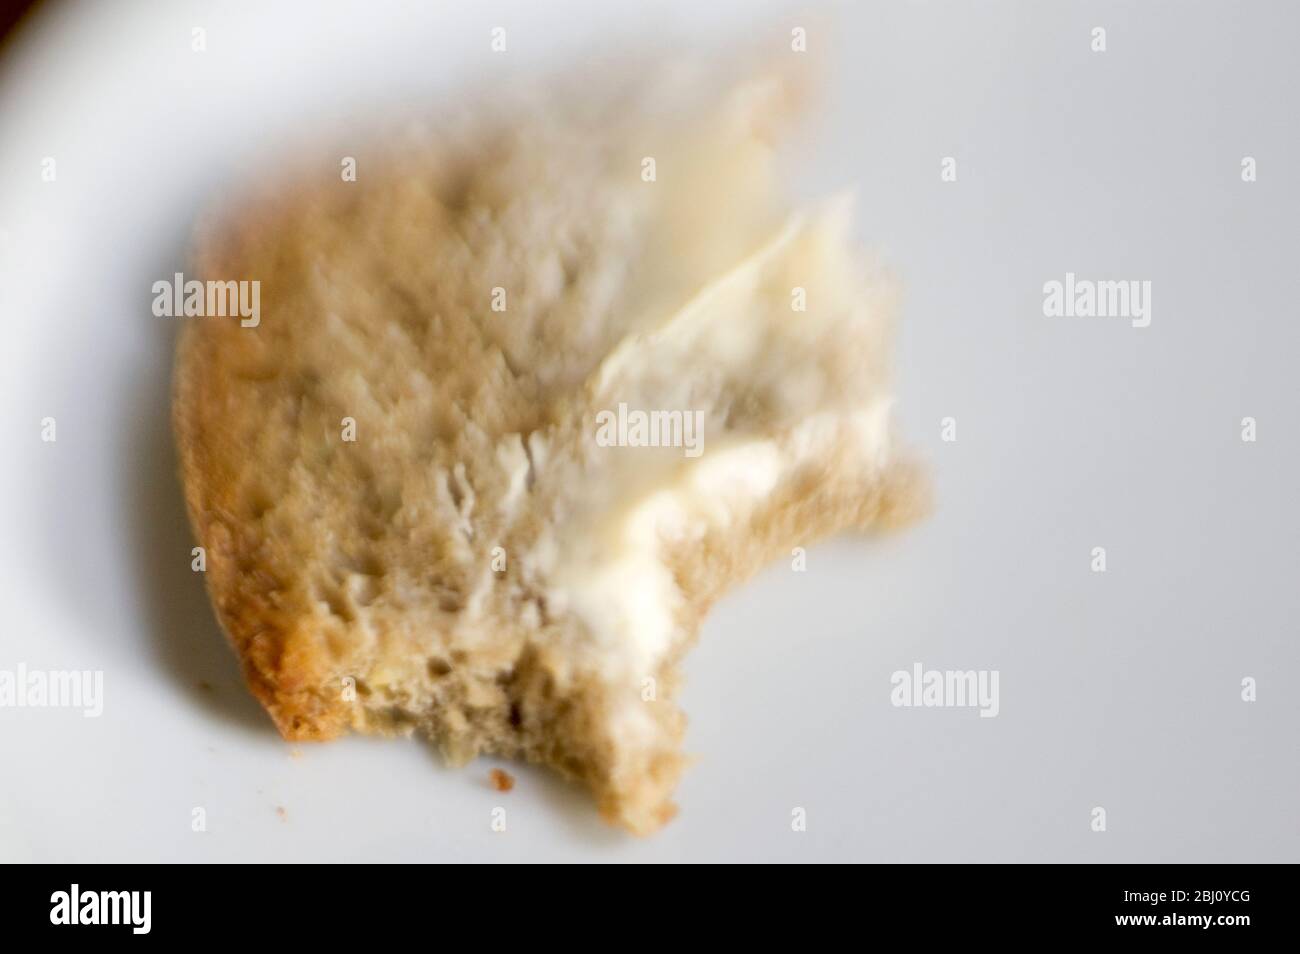 Piece of buttered bread with bites out - shot with lensbaby lens for short focus effect - Stock Photo